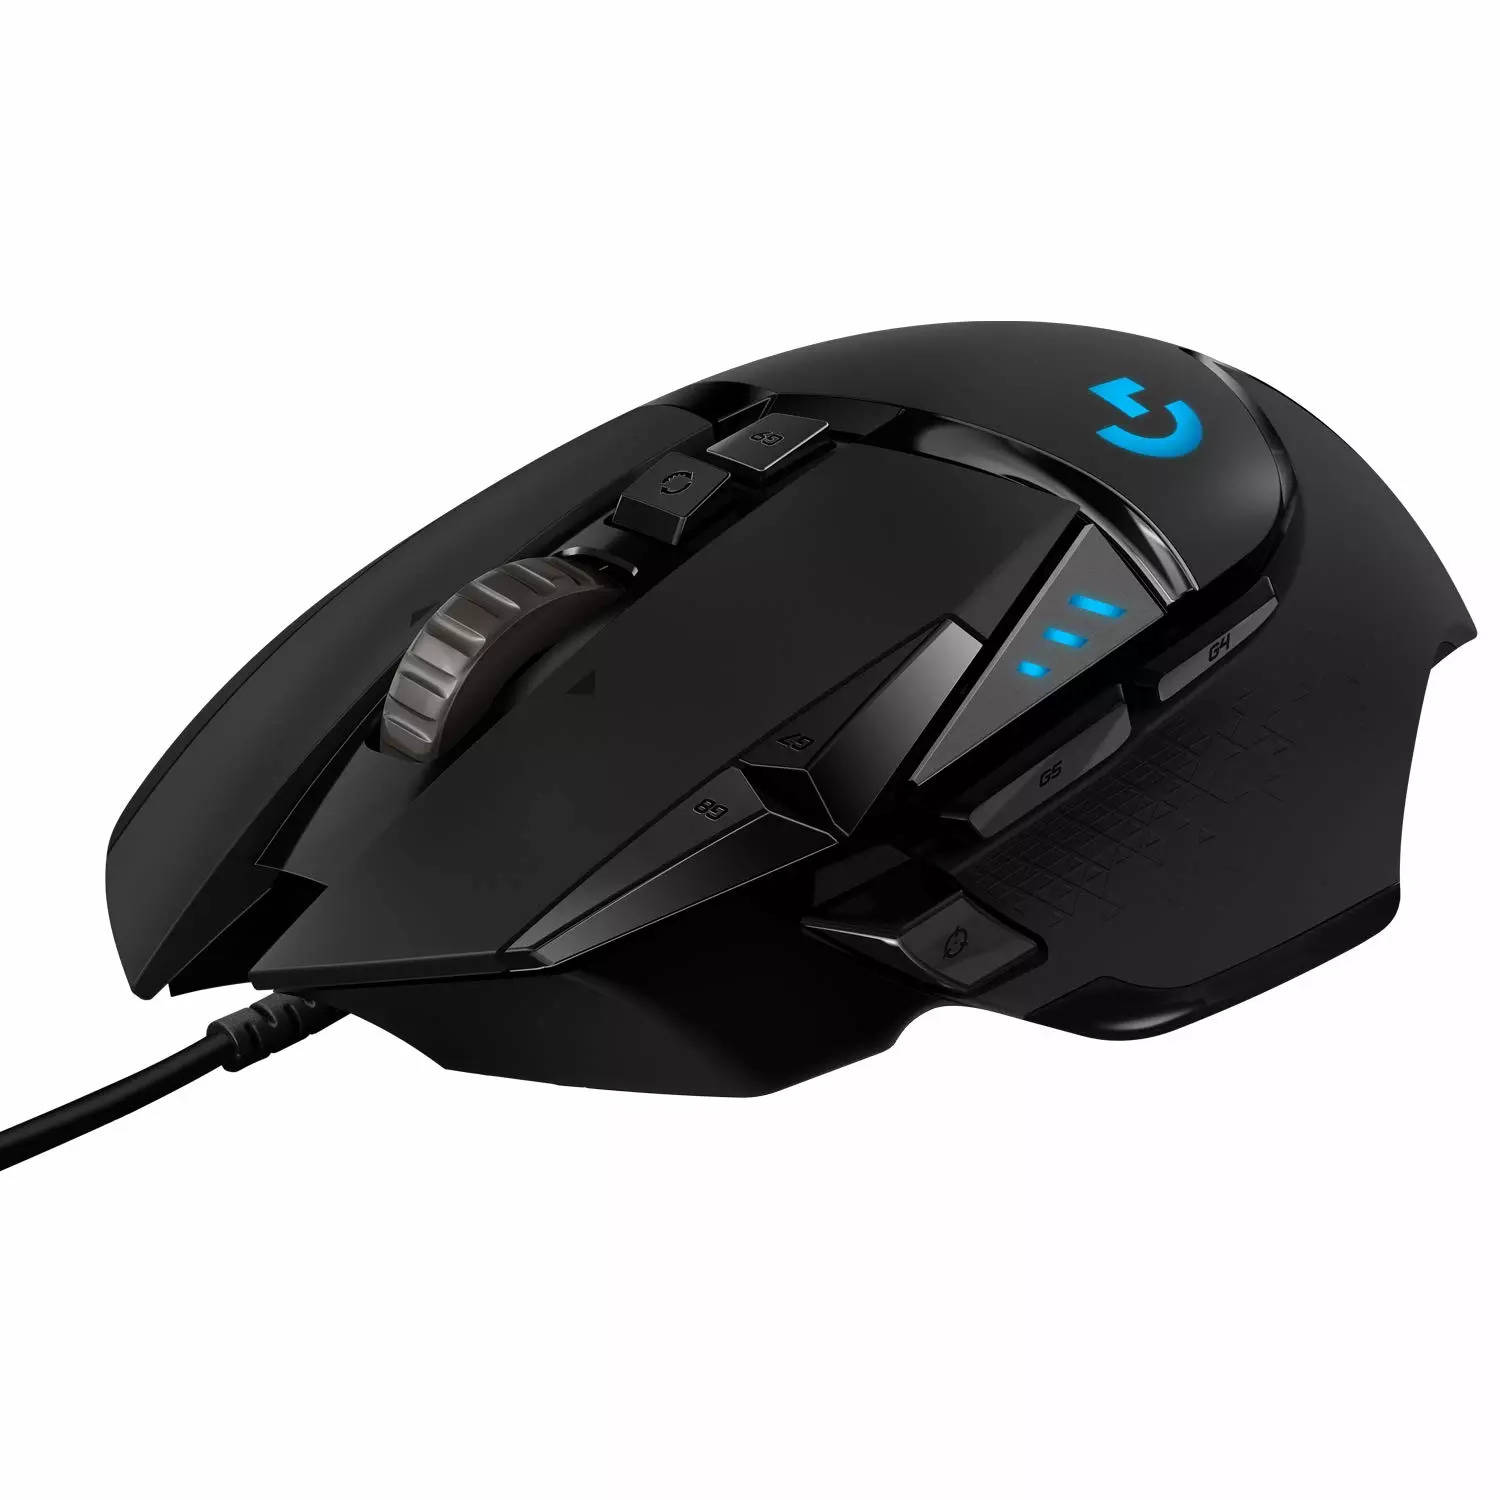 Best Gaming Mouse: Find Best Gaming Mouse in India for Professional Gamers  Starting at Rs. 199 - The Economic Times